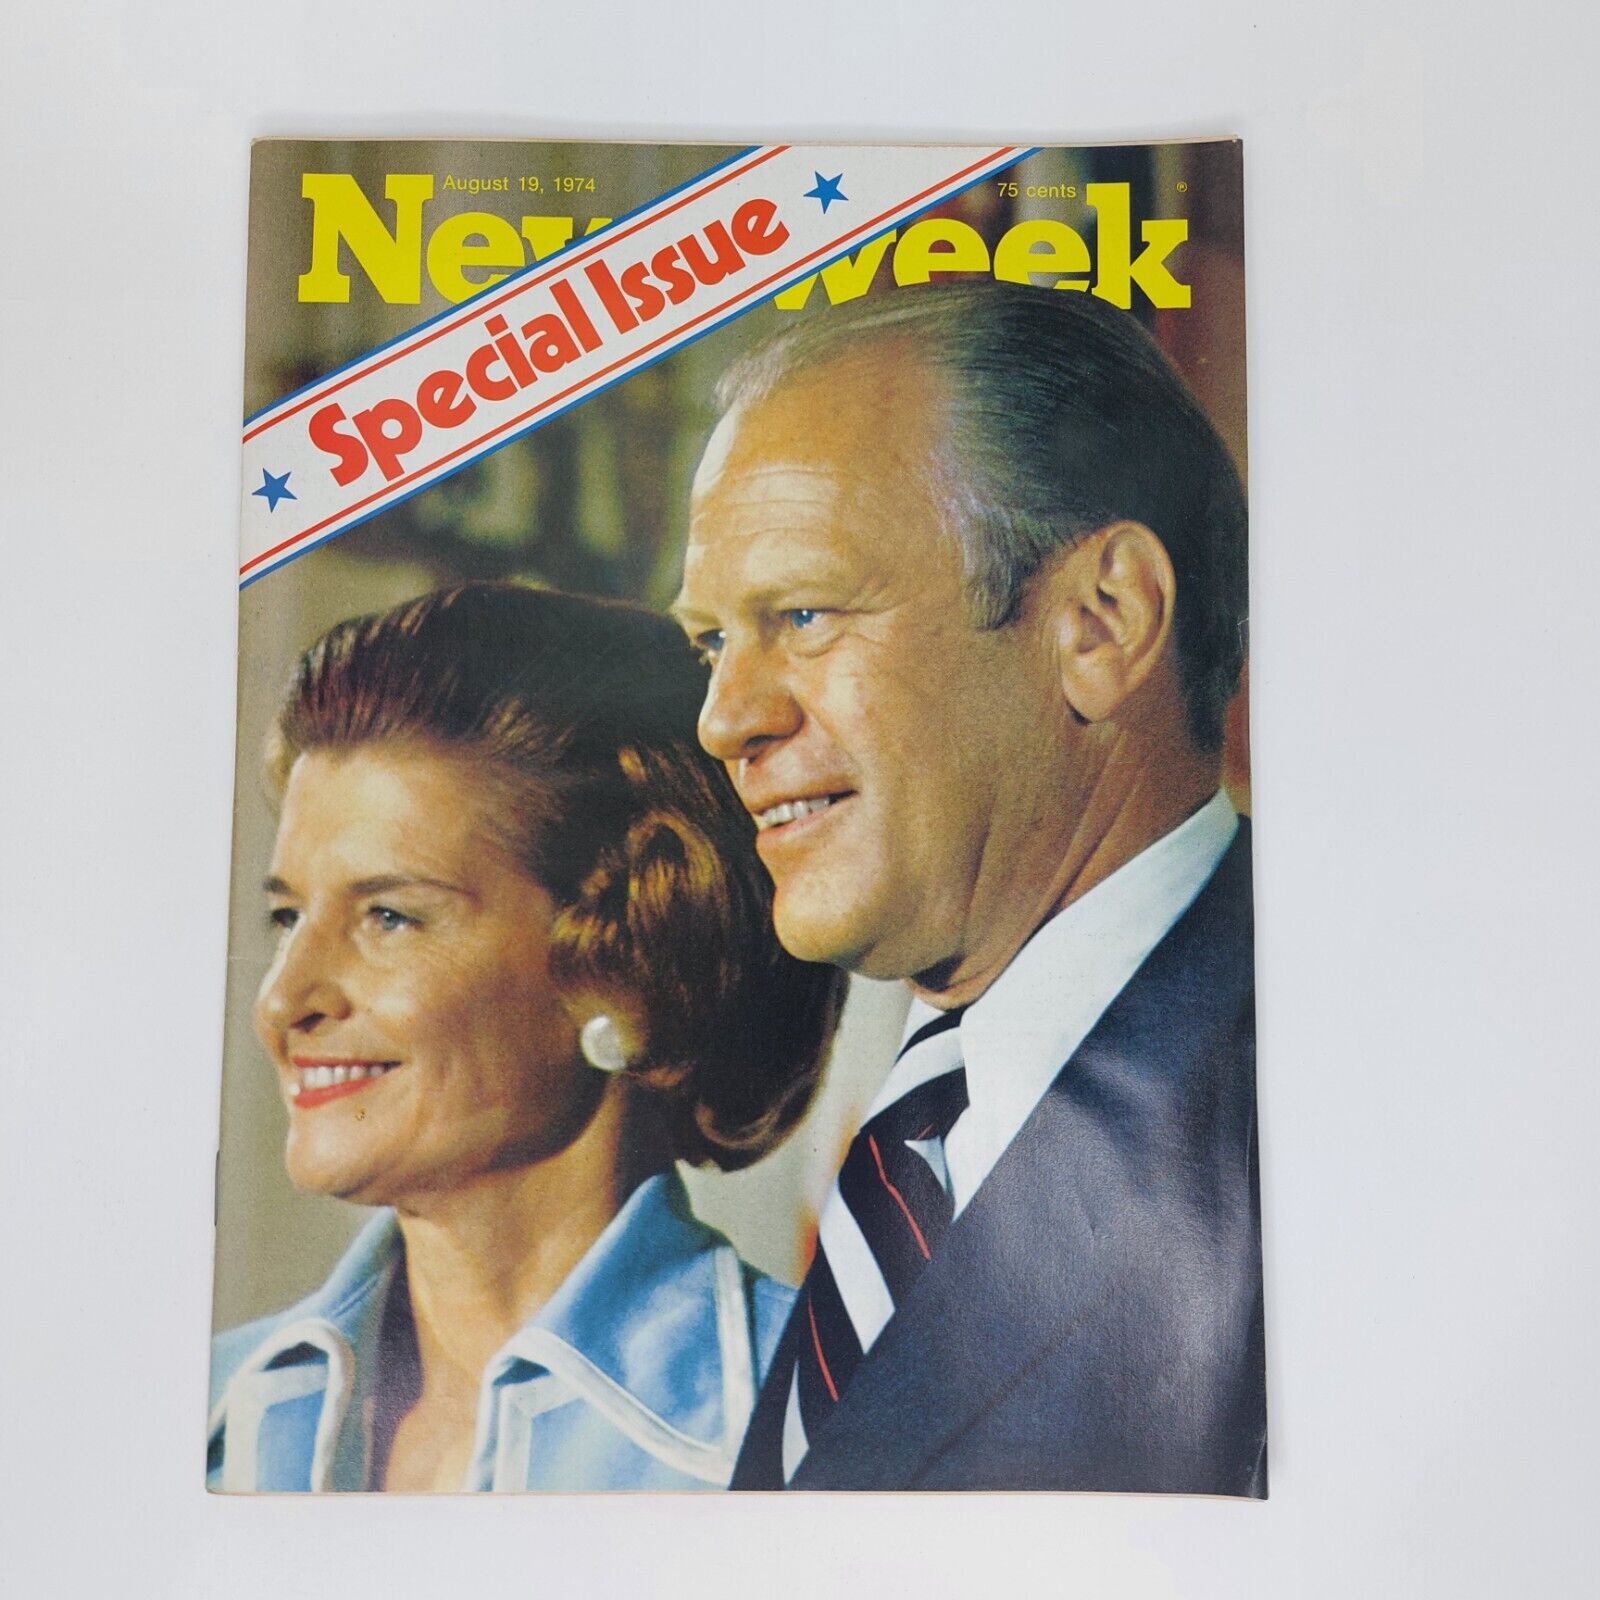 Collectors Vintage Newsweek Special August 19 1974 Excellent Preowned Condition